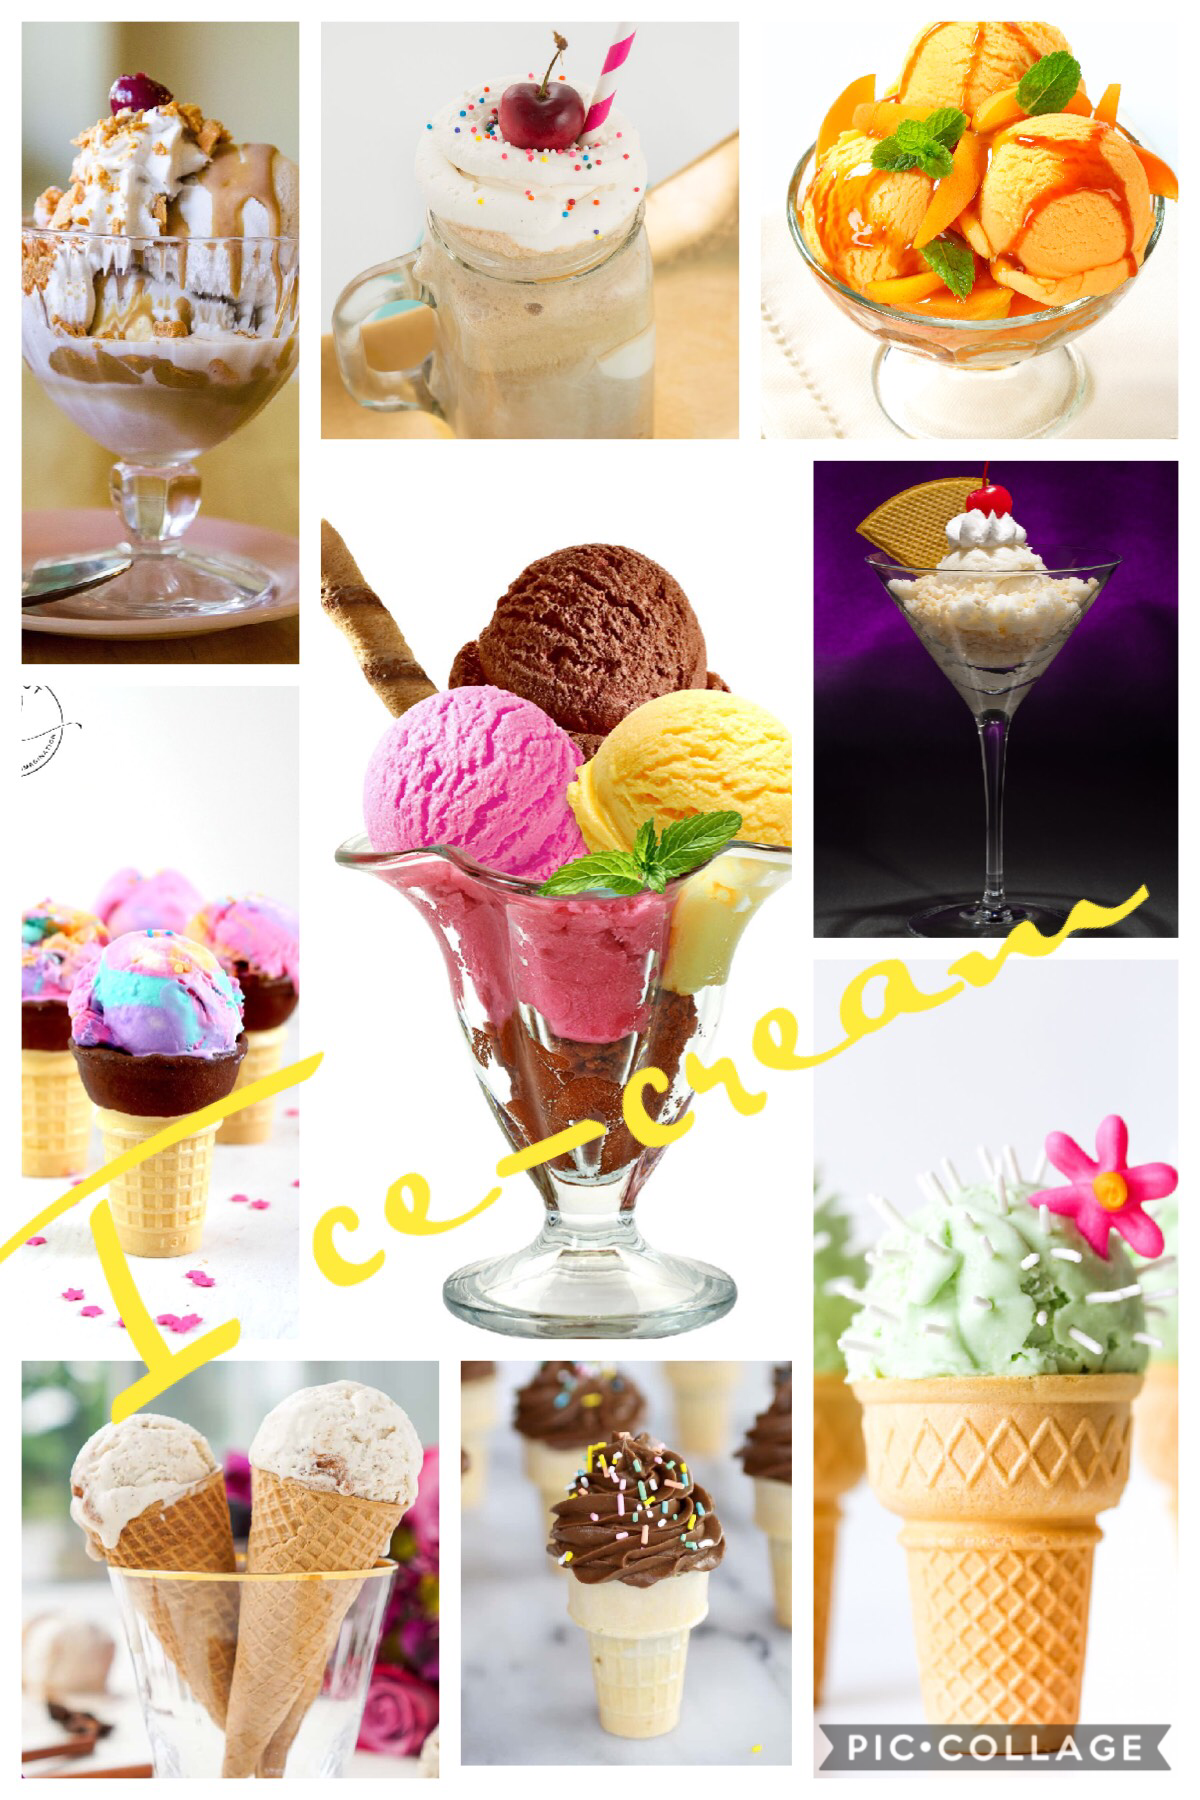 What’s your favourite cold dessert?
